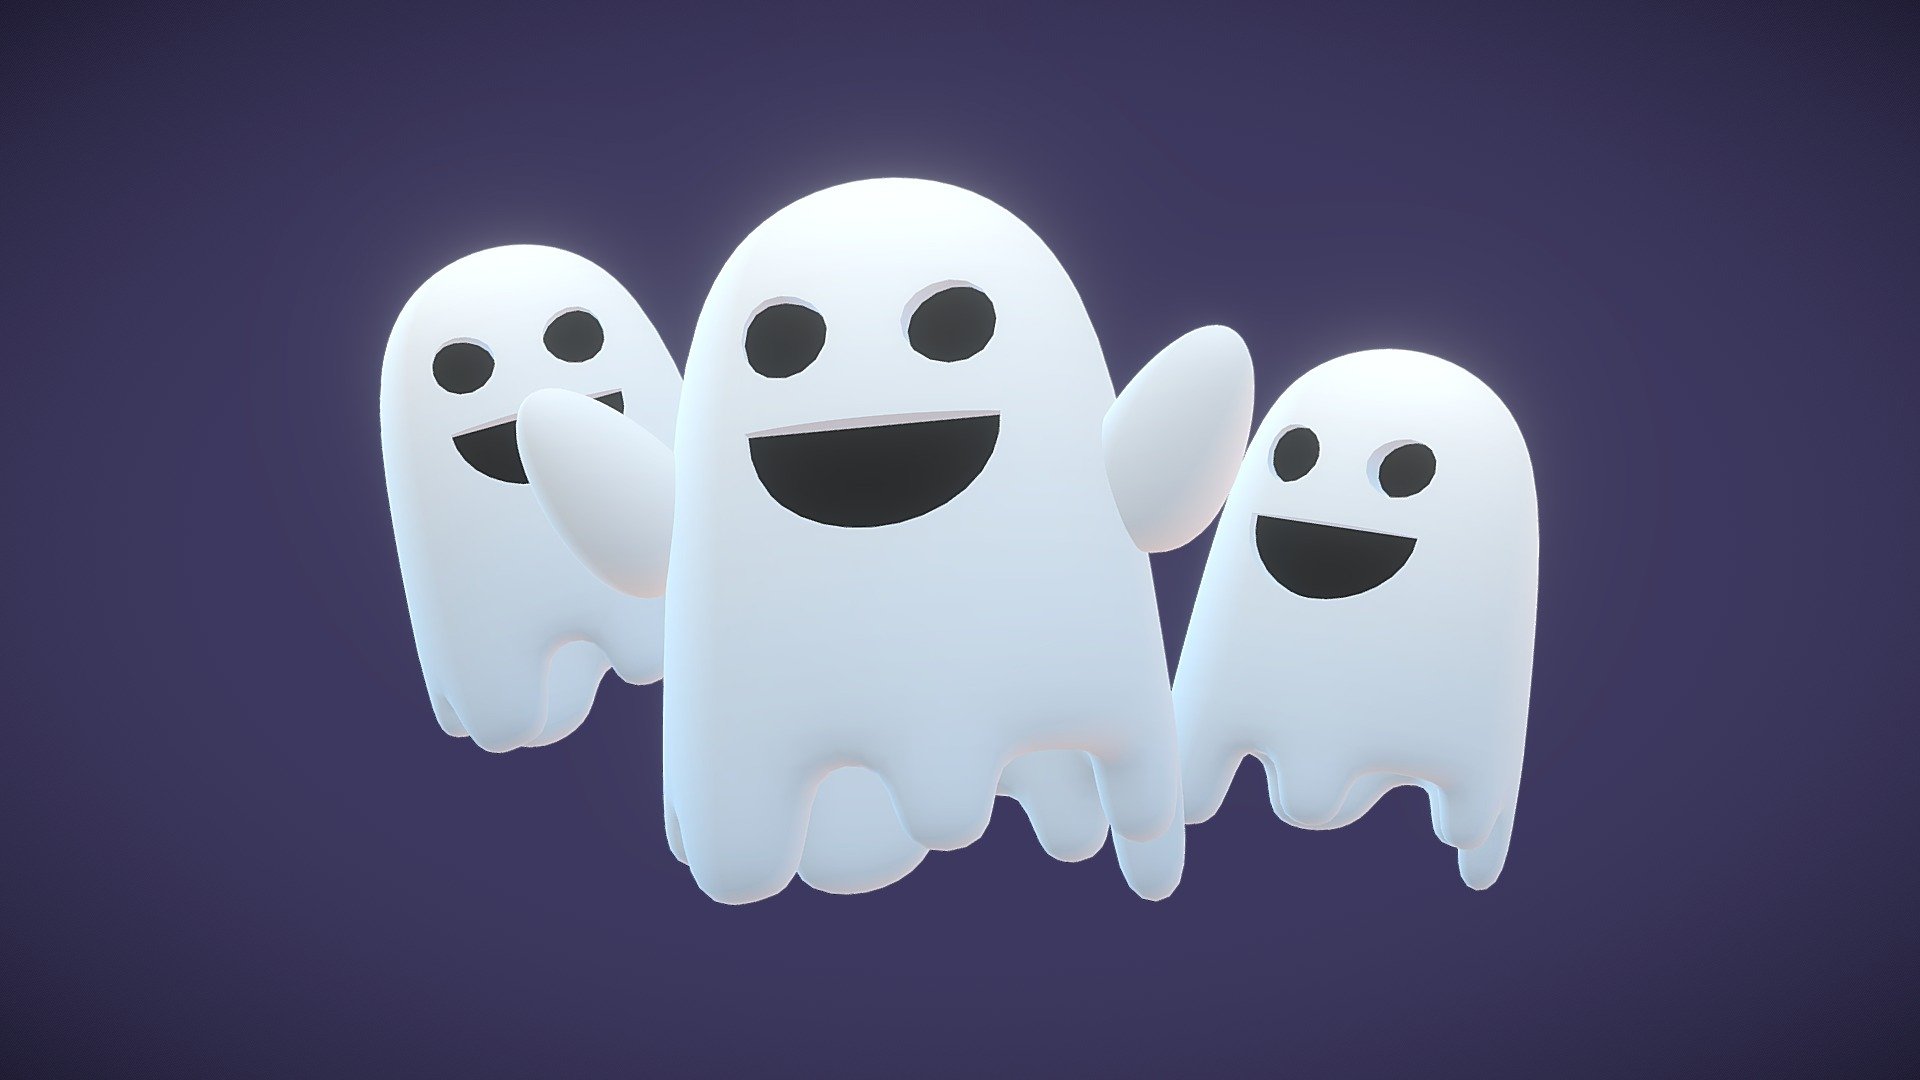 Spooky Gost Halloween for videogames.

Texturing with a simple gradient 256x256, ready for mobile game performance.




Blender Native File, fbx exporter.

256x256 PNG texture.

Accept freelance jobs. Do not hesitate to write me.

-------------Terms of Use--------------

Commercial use of the assets provided is permitted but cannot be included in an asset pack or sold at any sort of asset/resource marketplace 3d model